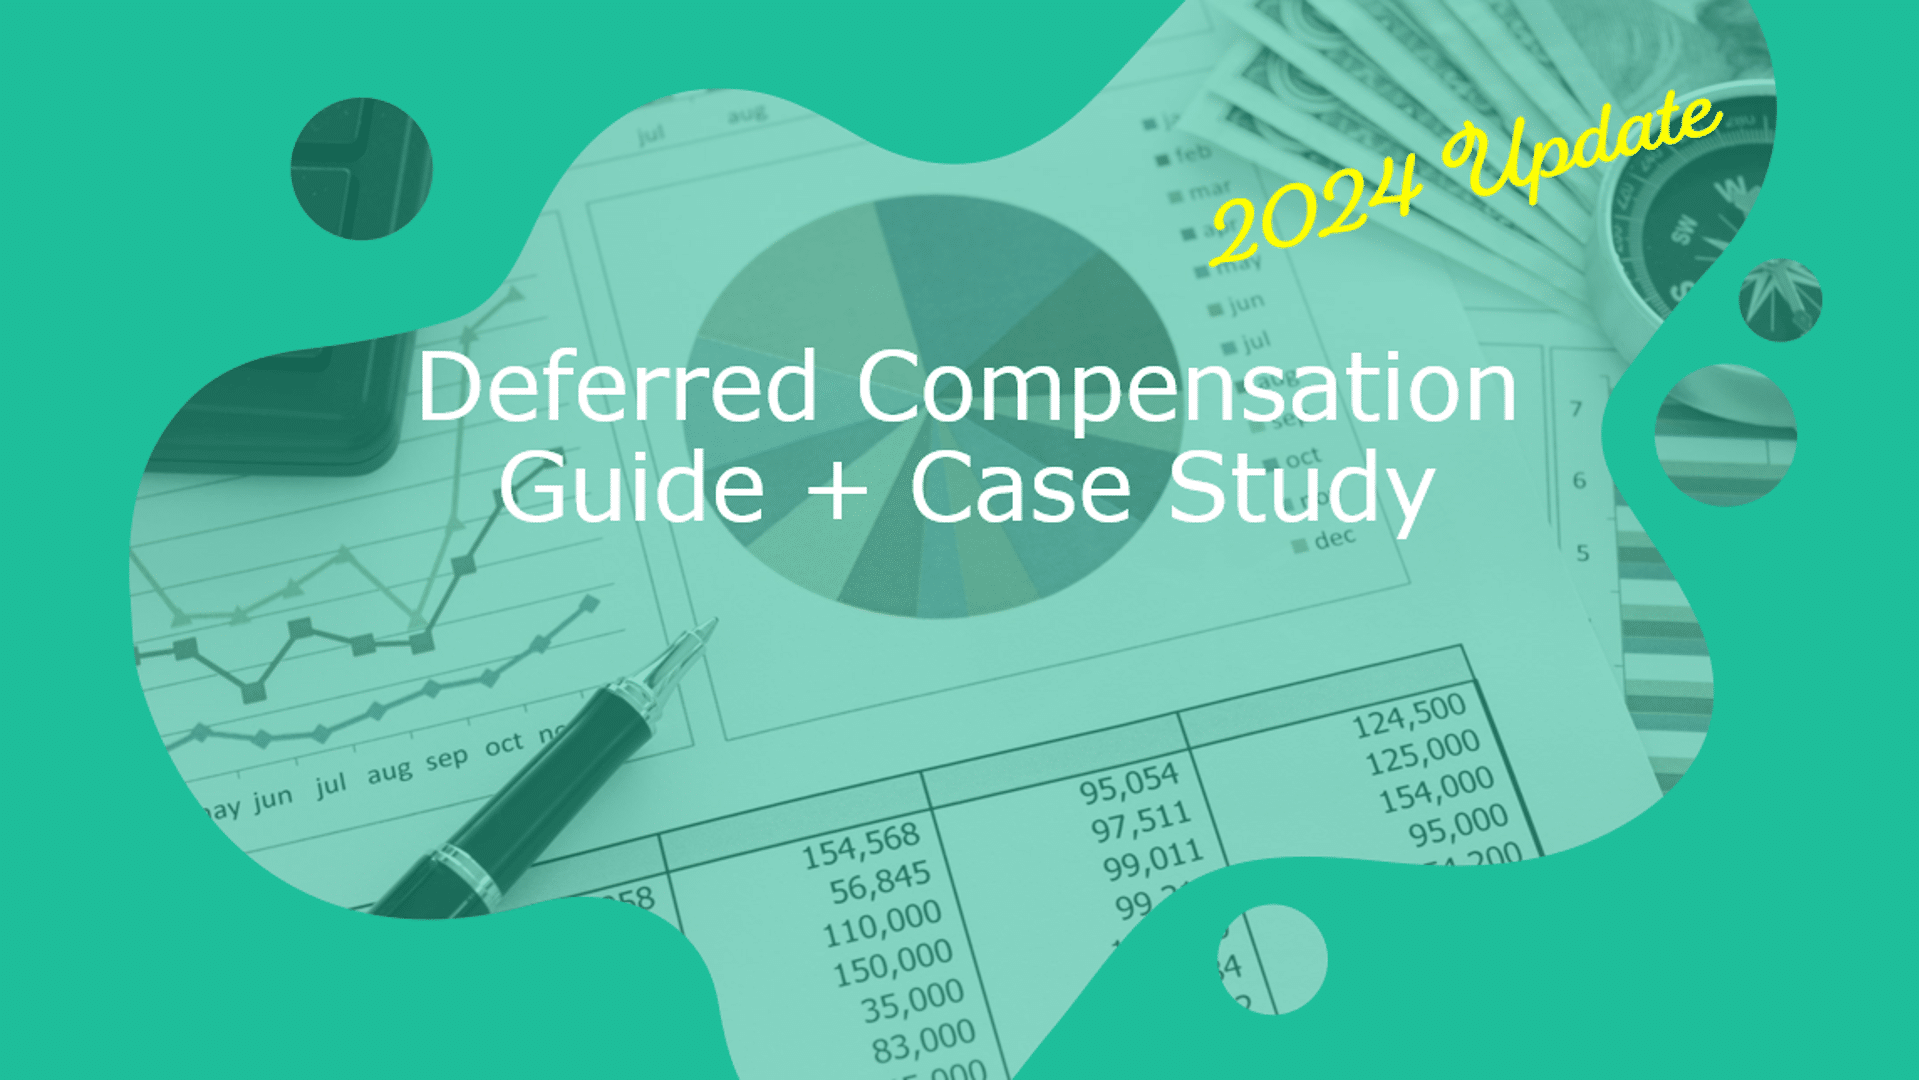 Non-Qualified Deferred Compensation Guide + Case Study 2024 Update